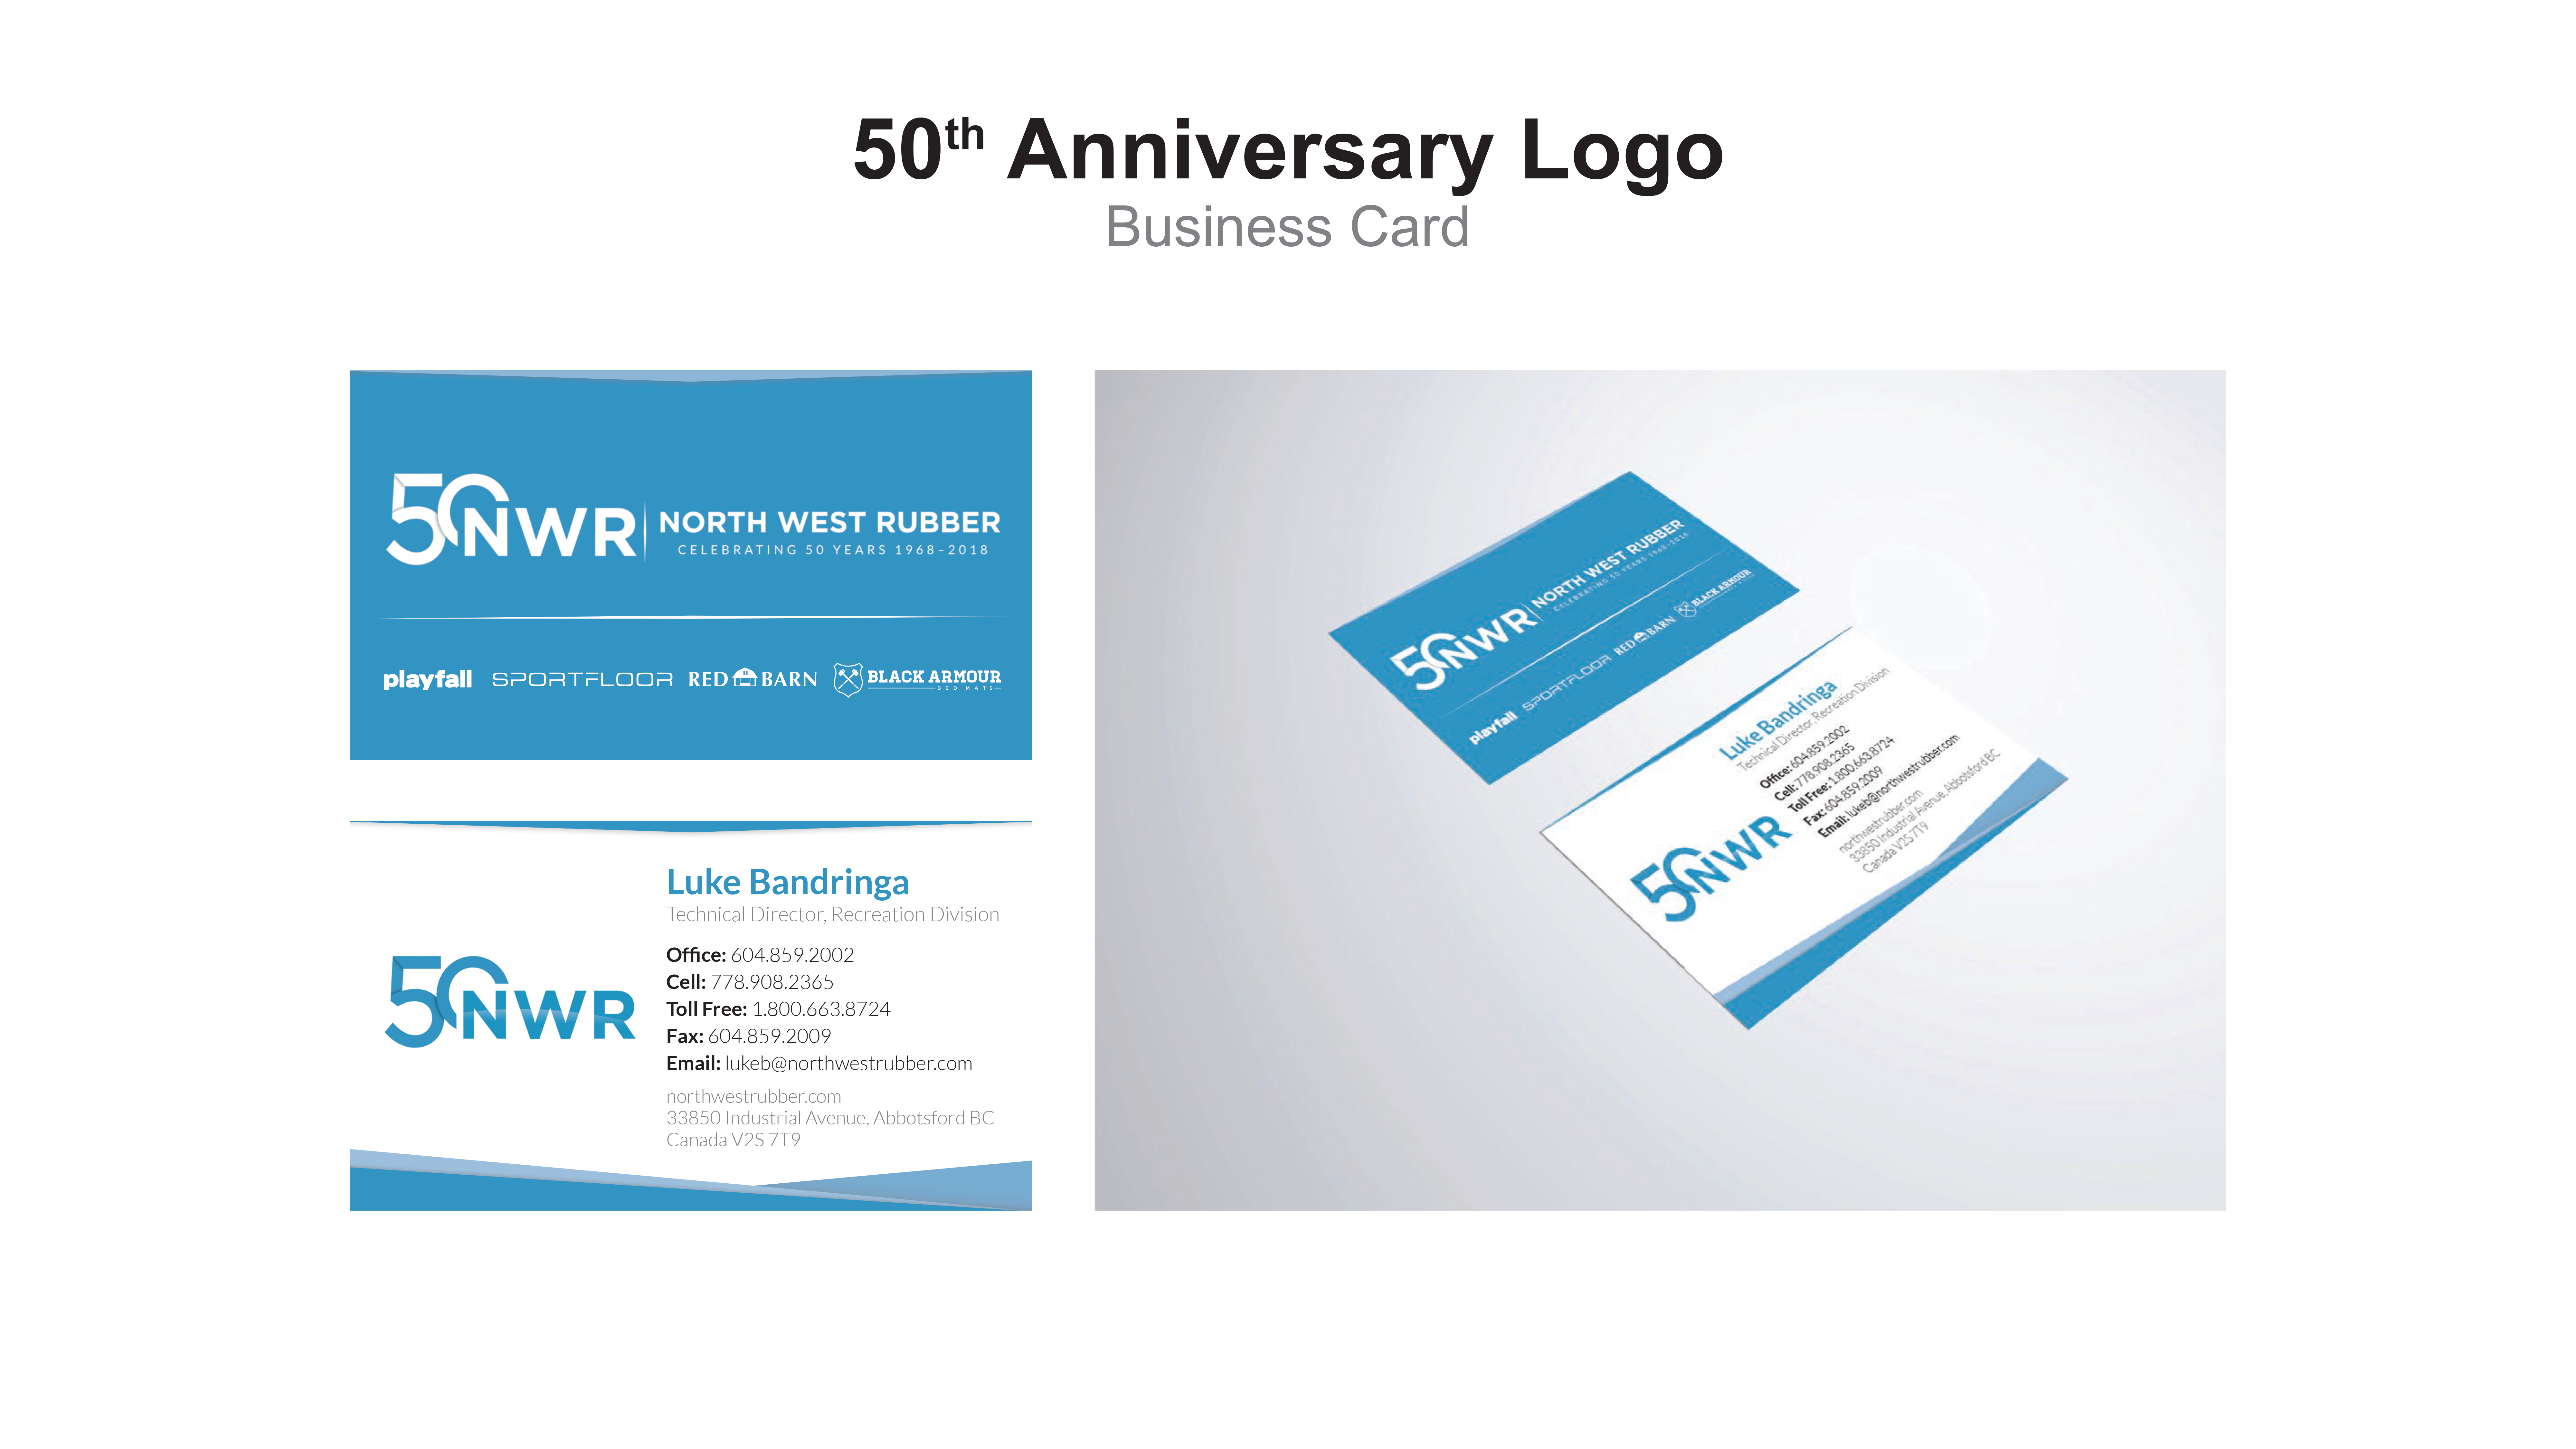 North West Rubber - 50 years business card design